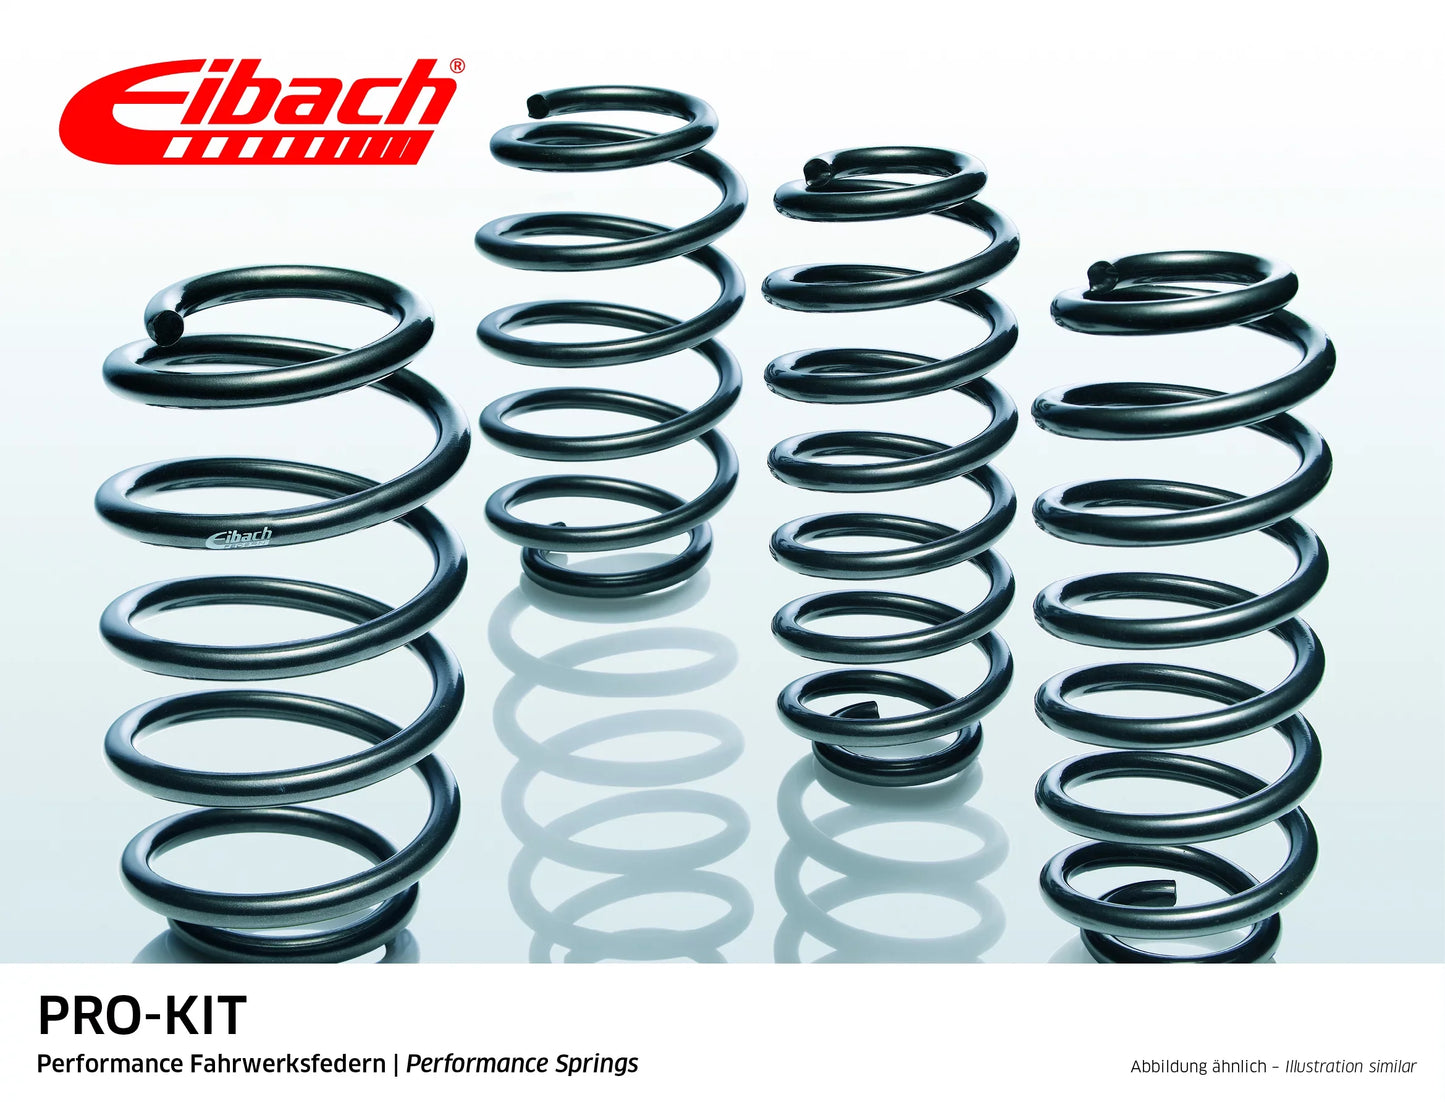 Eibach Pro-Kit Lowering Springs (E10-20-032-02-22) at £356.79